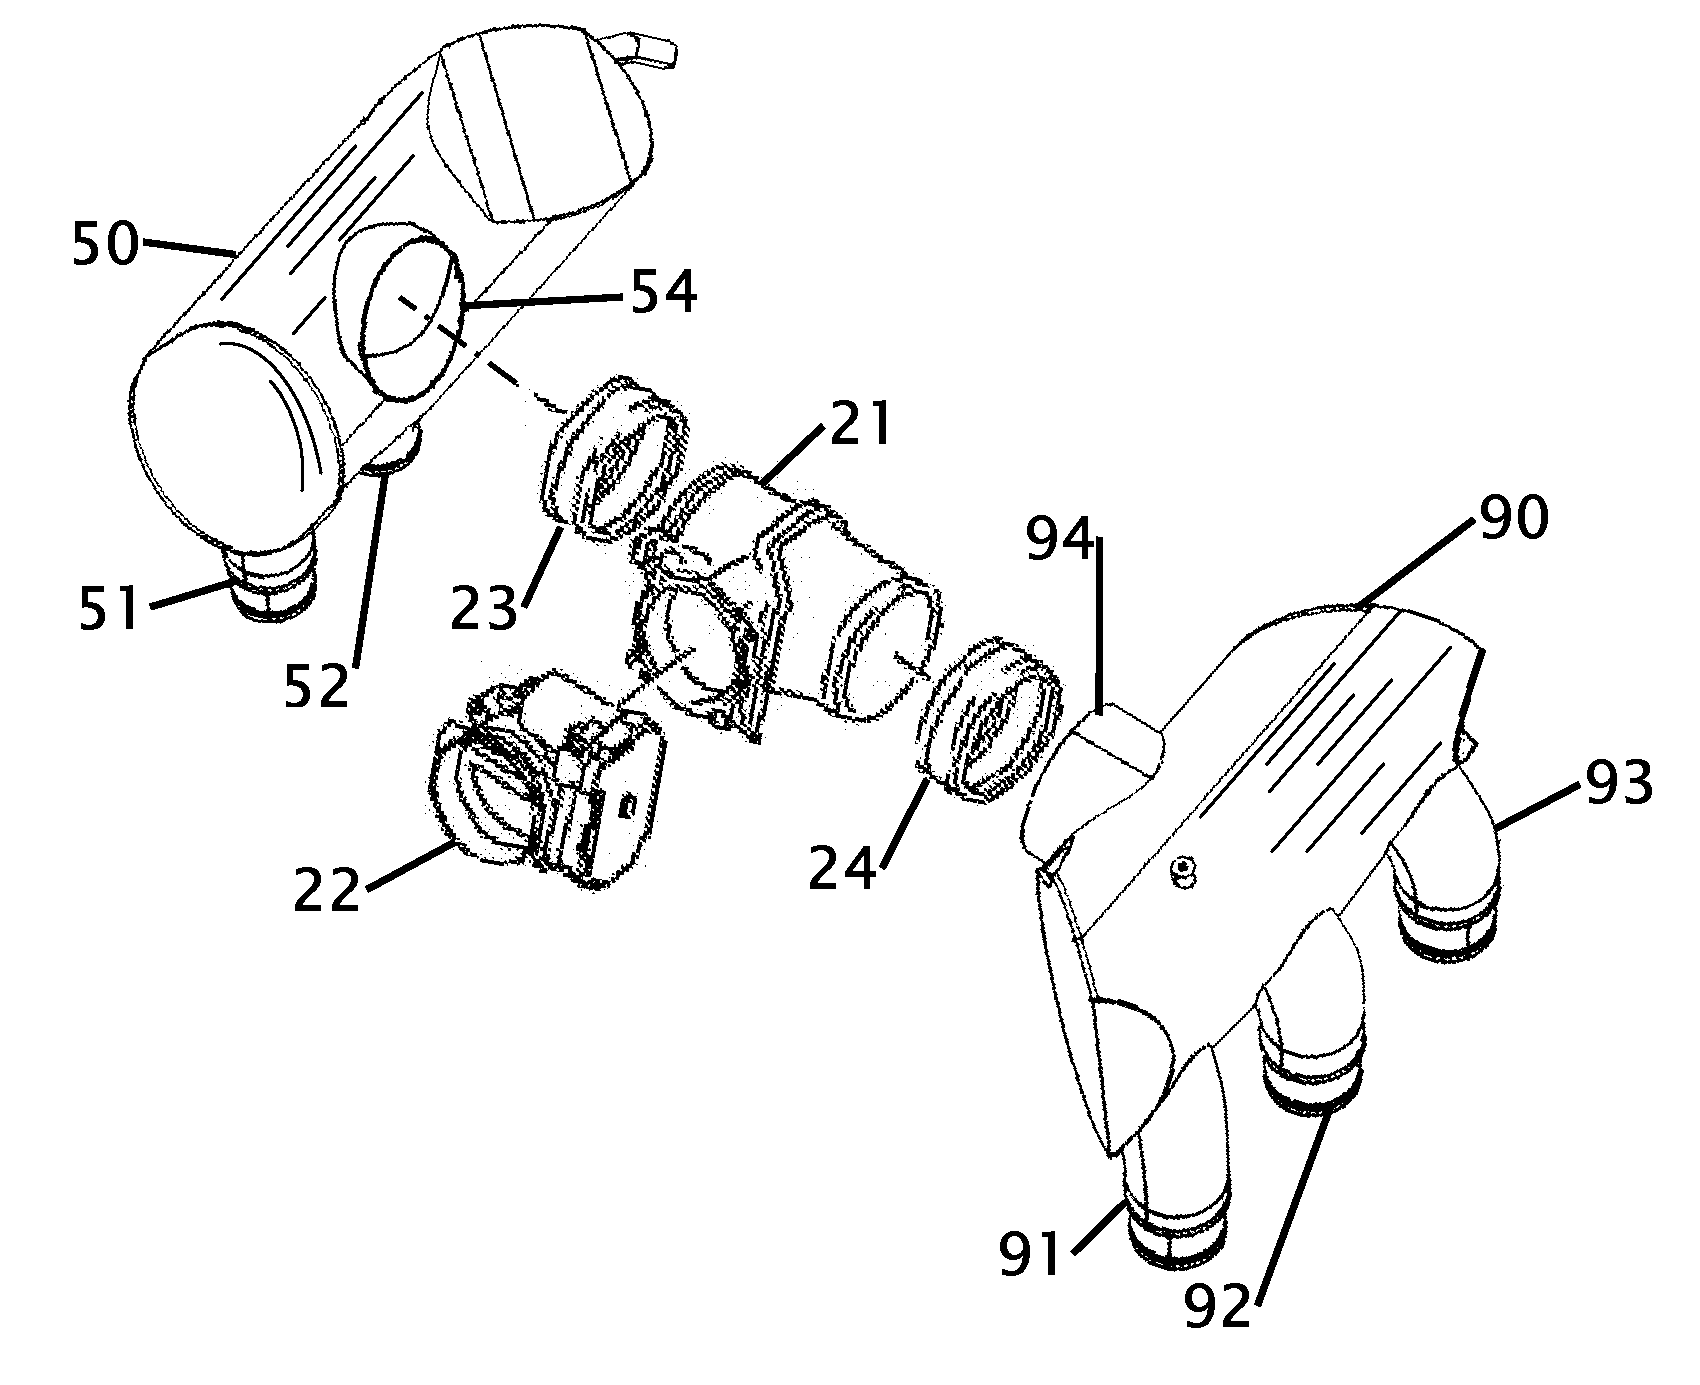 Intake manifolds for internal combustion engine